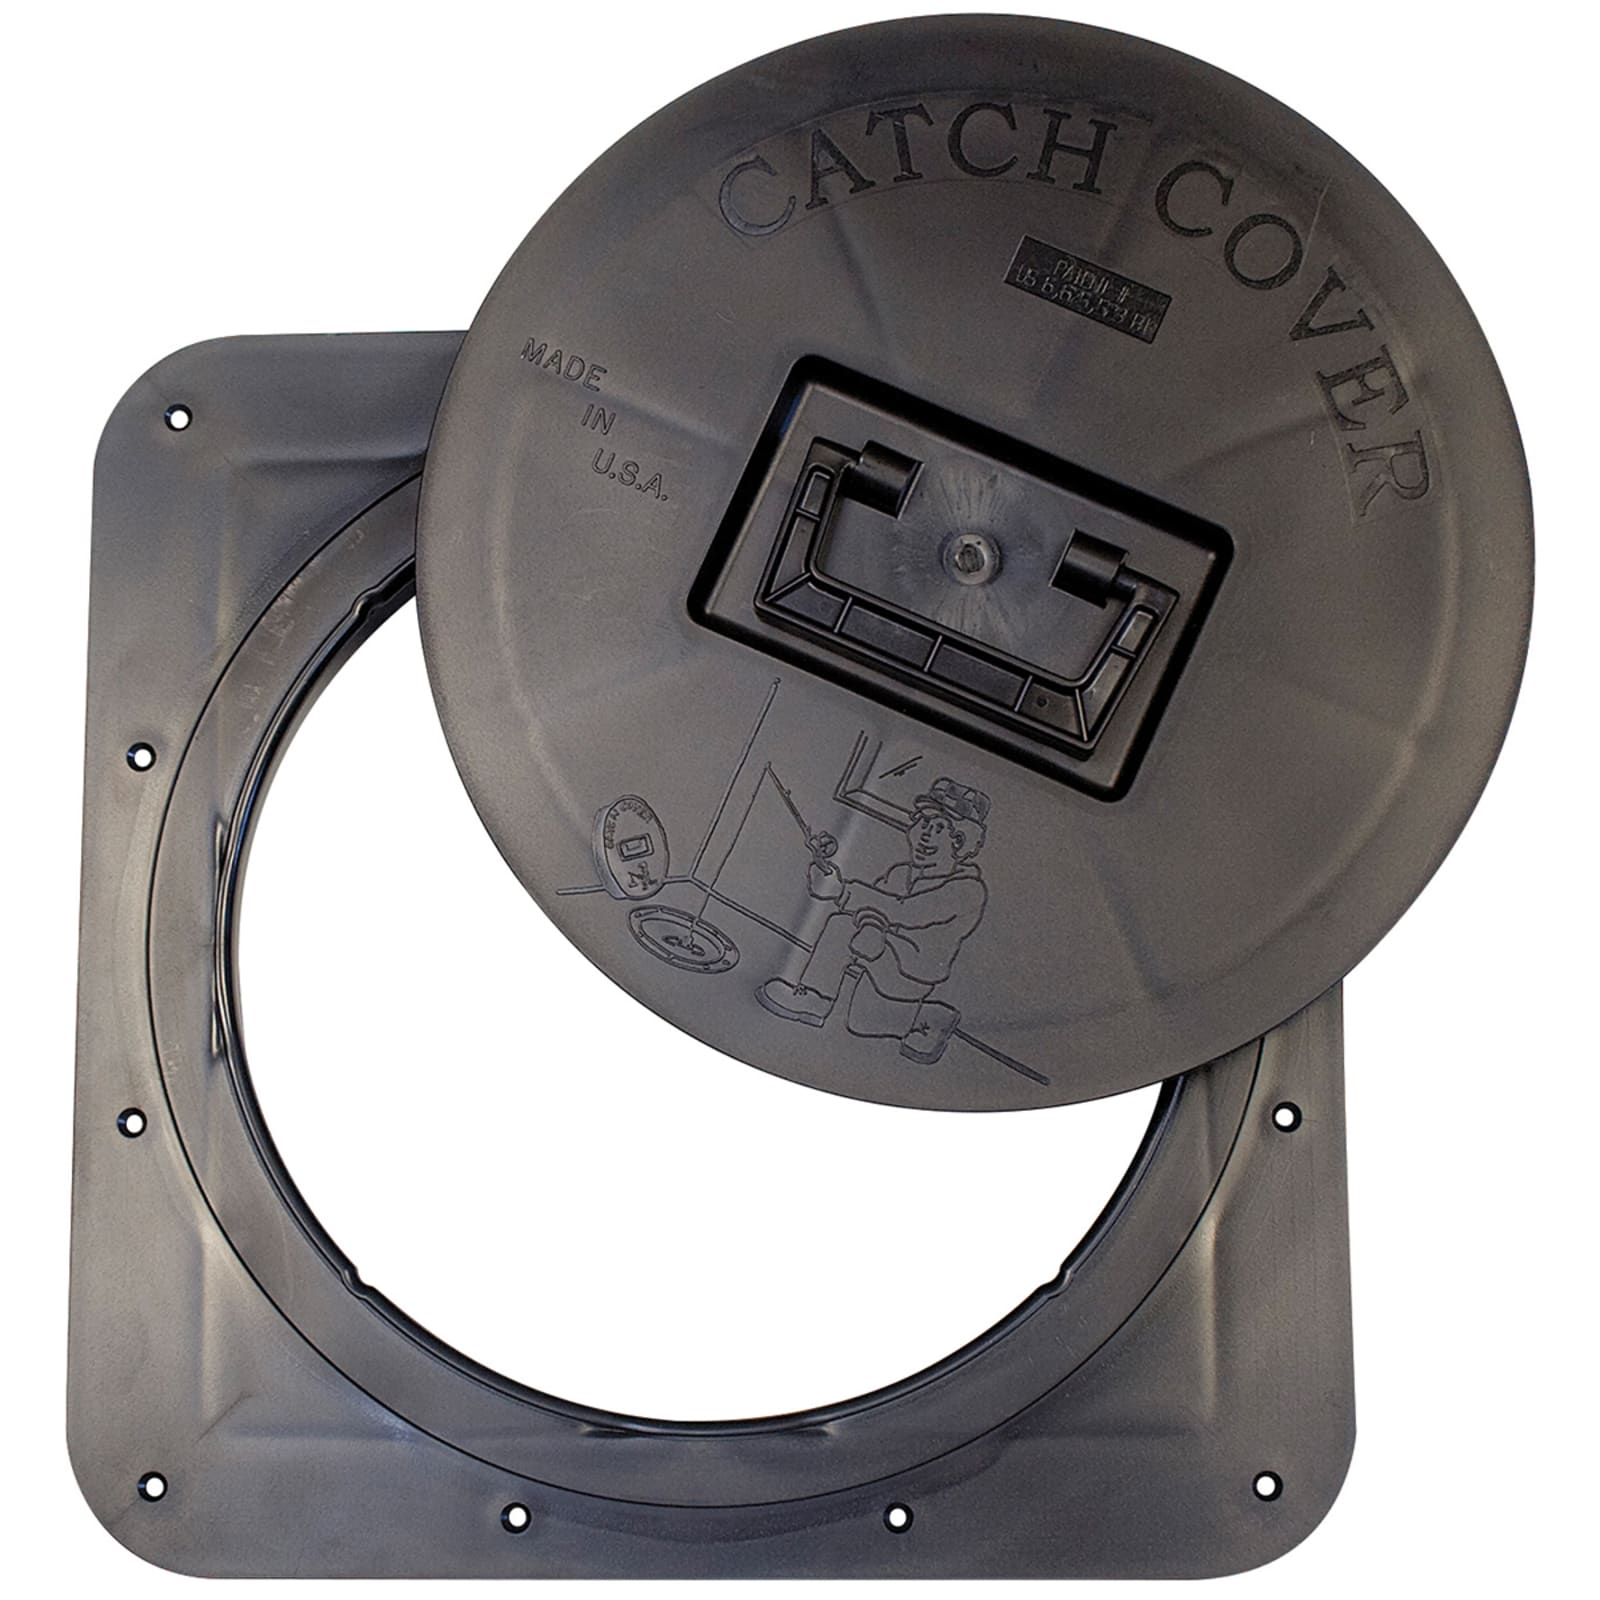 Original Black Square Ice House Hole Cover by Catch Cover at Fleet